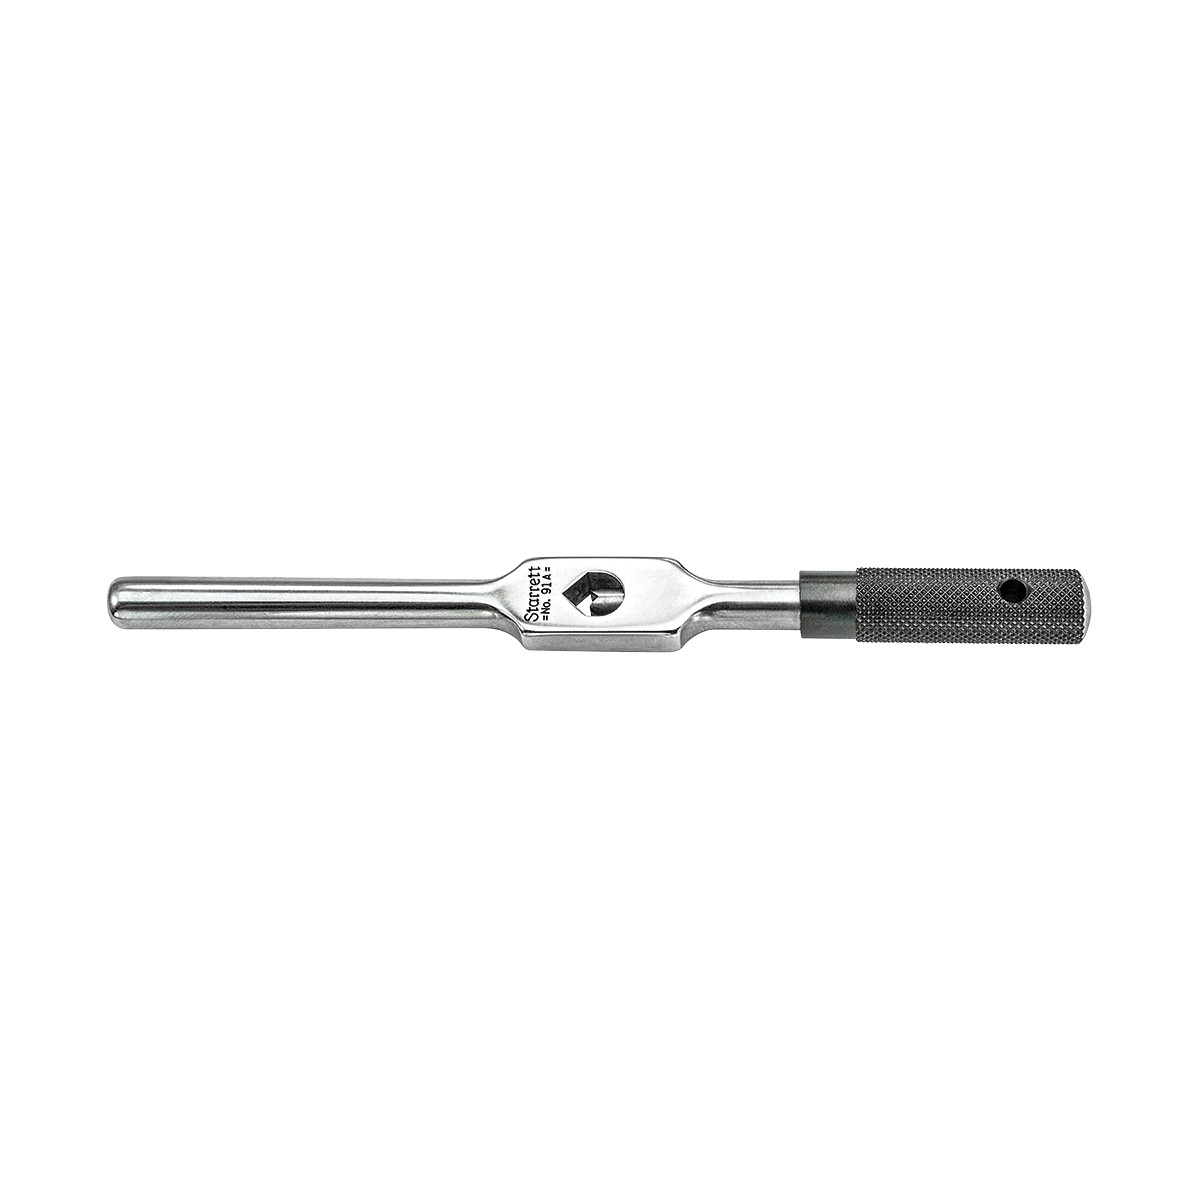 3/32-5/32 Square Shank Diameter 6 Body Length 1/16-1/4 Tap Size 3/32-5/32 Square Shank Diameter 6 Body Length STAKF Starrett 91A Tap Wrench 1/16-1/4 Tap Size